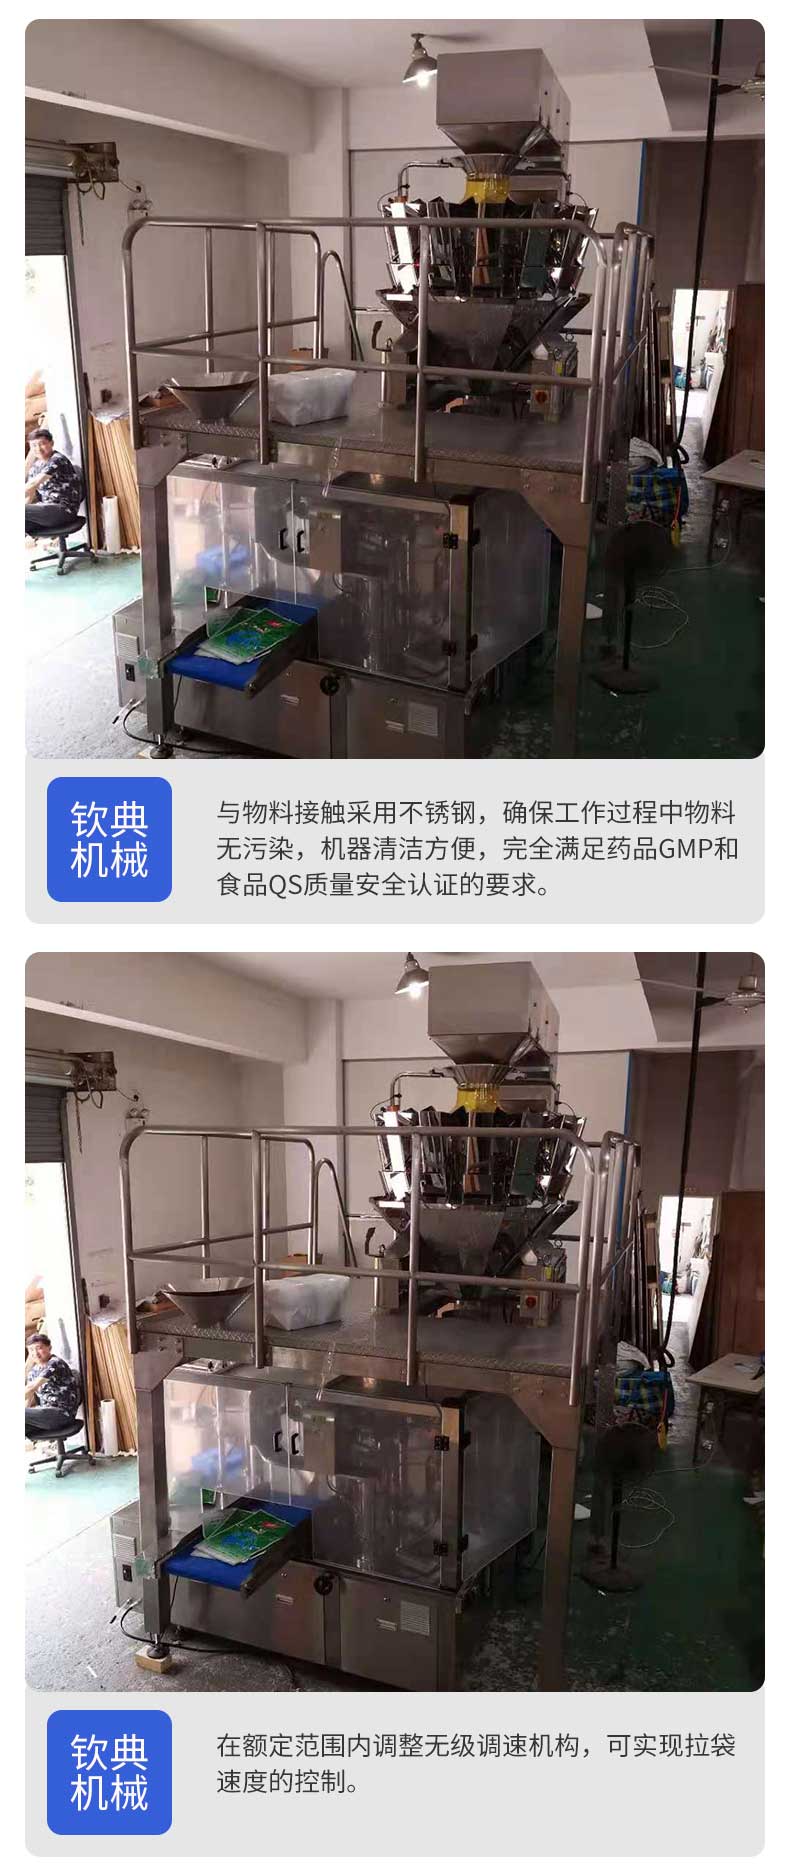 Qindian fully automatic bag packaging machine multifunctional packaging equipment for soybean, nut, seed, and miscellaneous grains